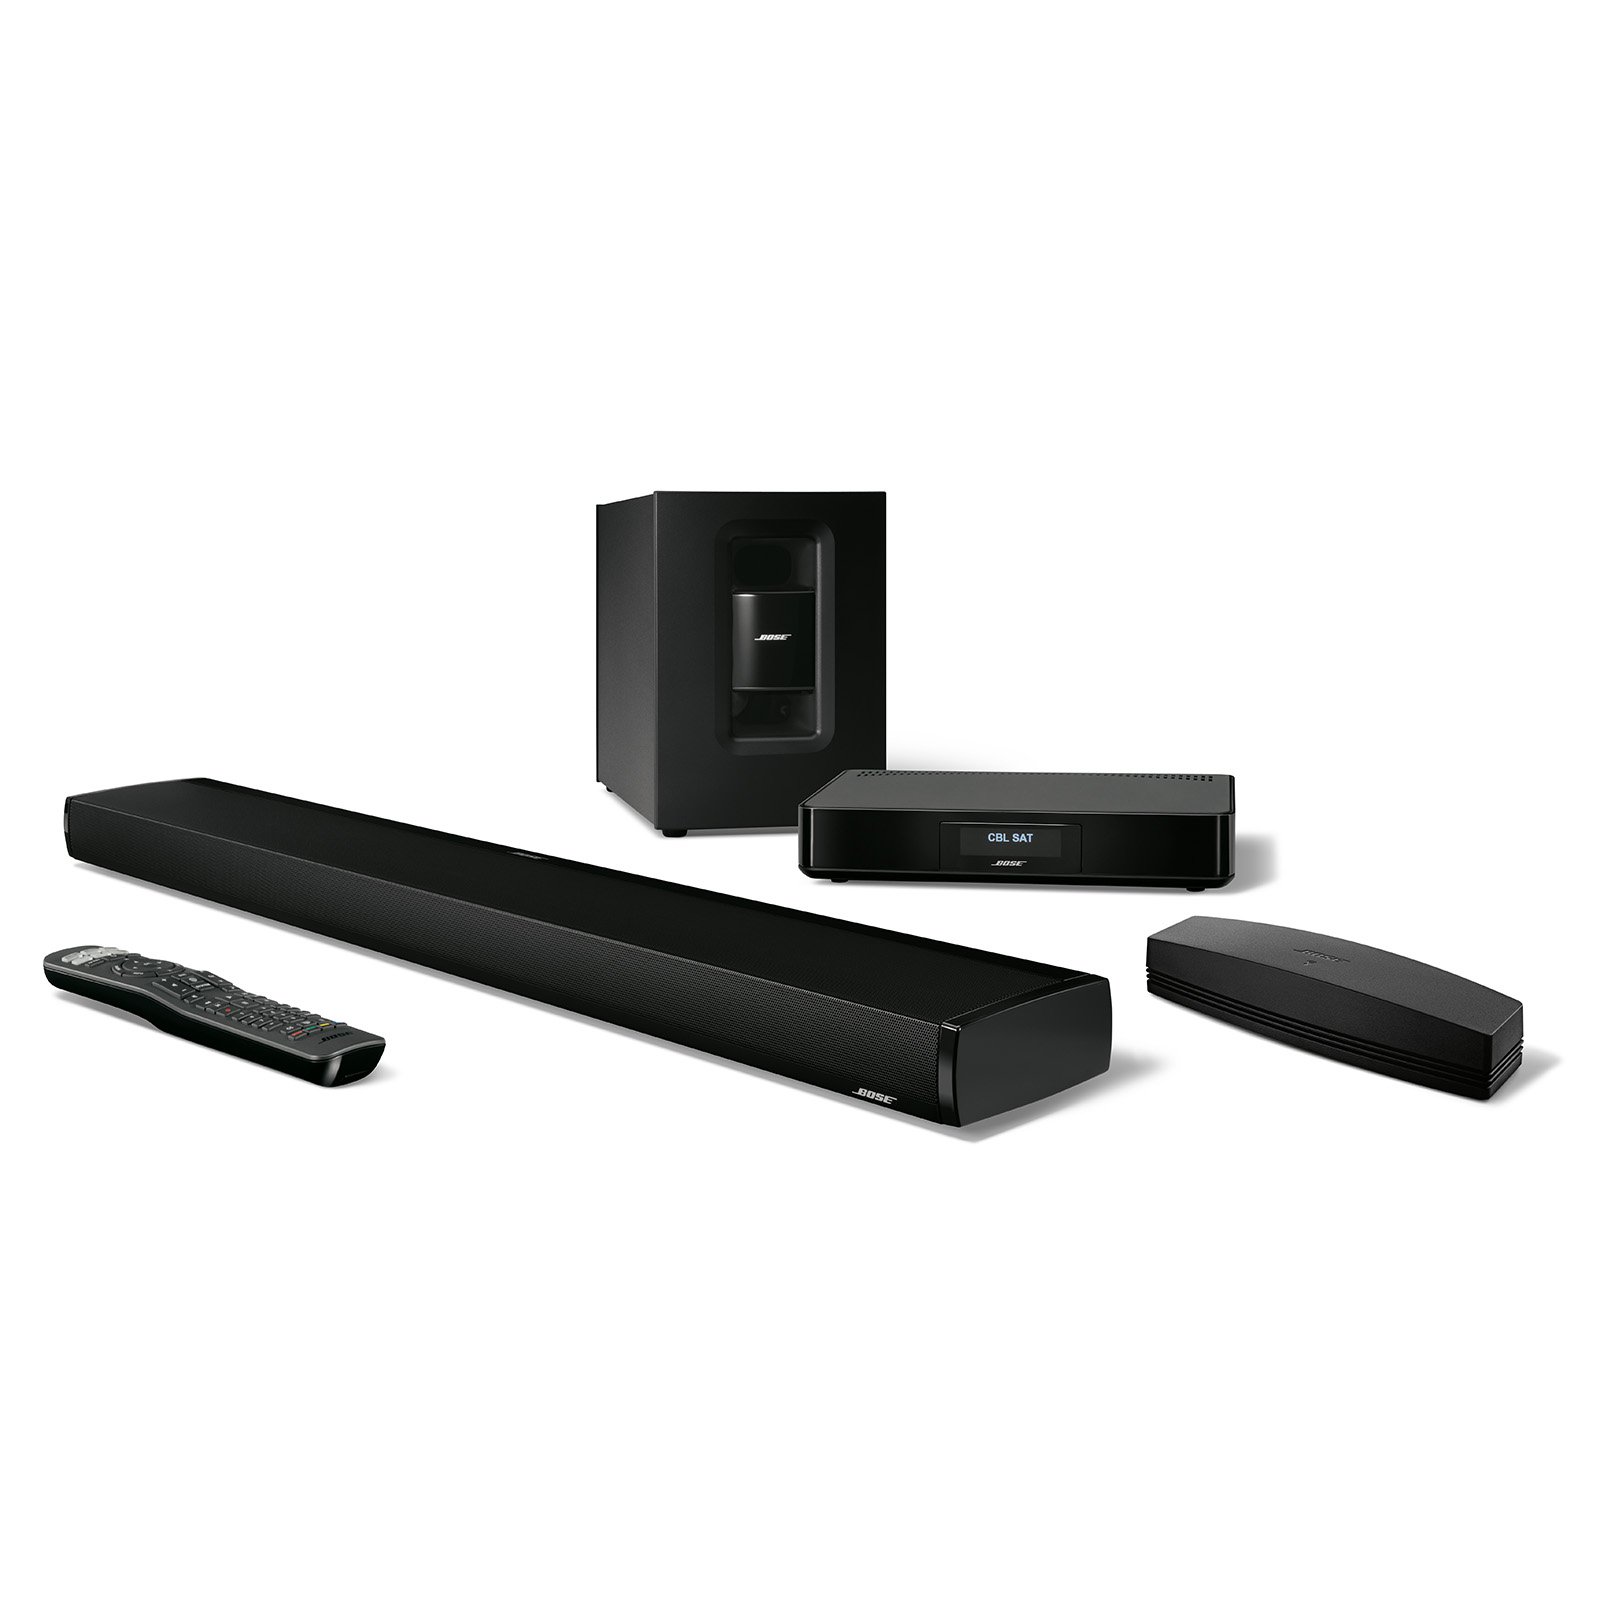 cinemate 130 home theater system